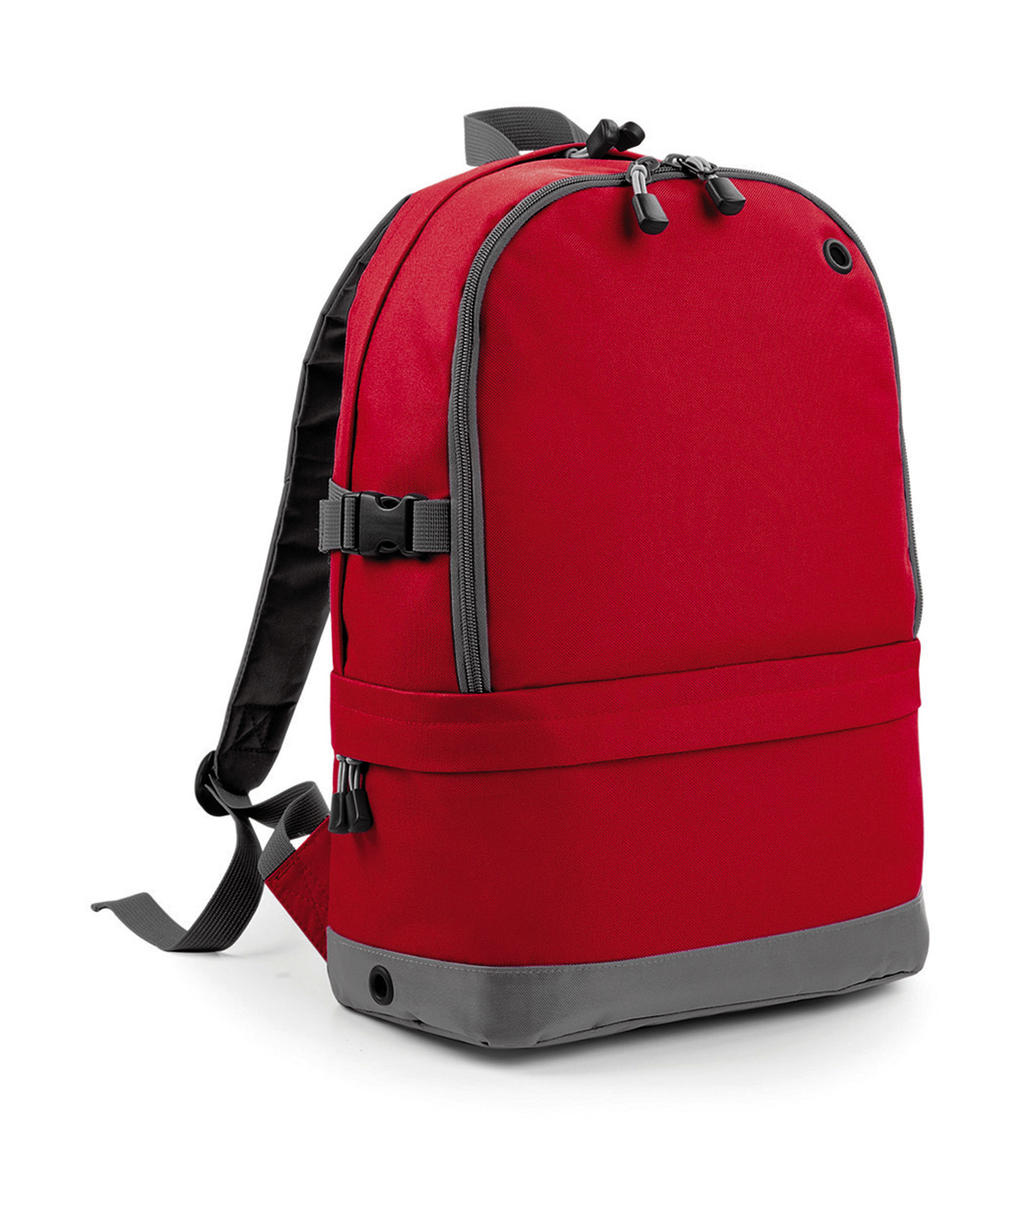  Athleisure Pro Backpack in Farbe Classic Red